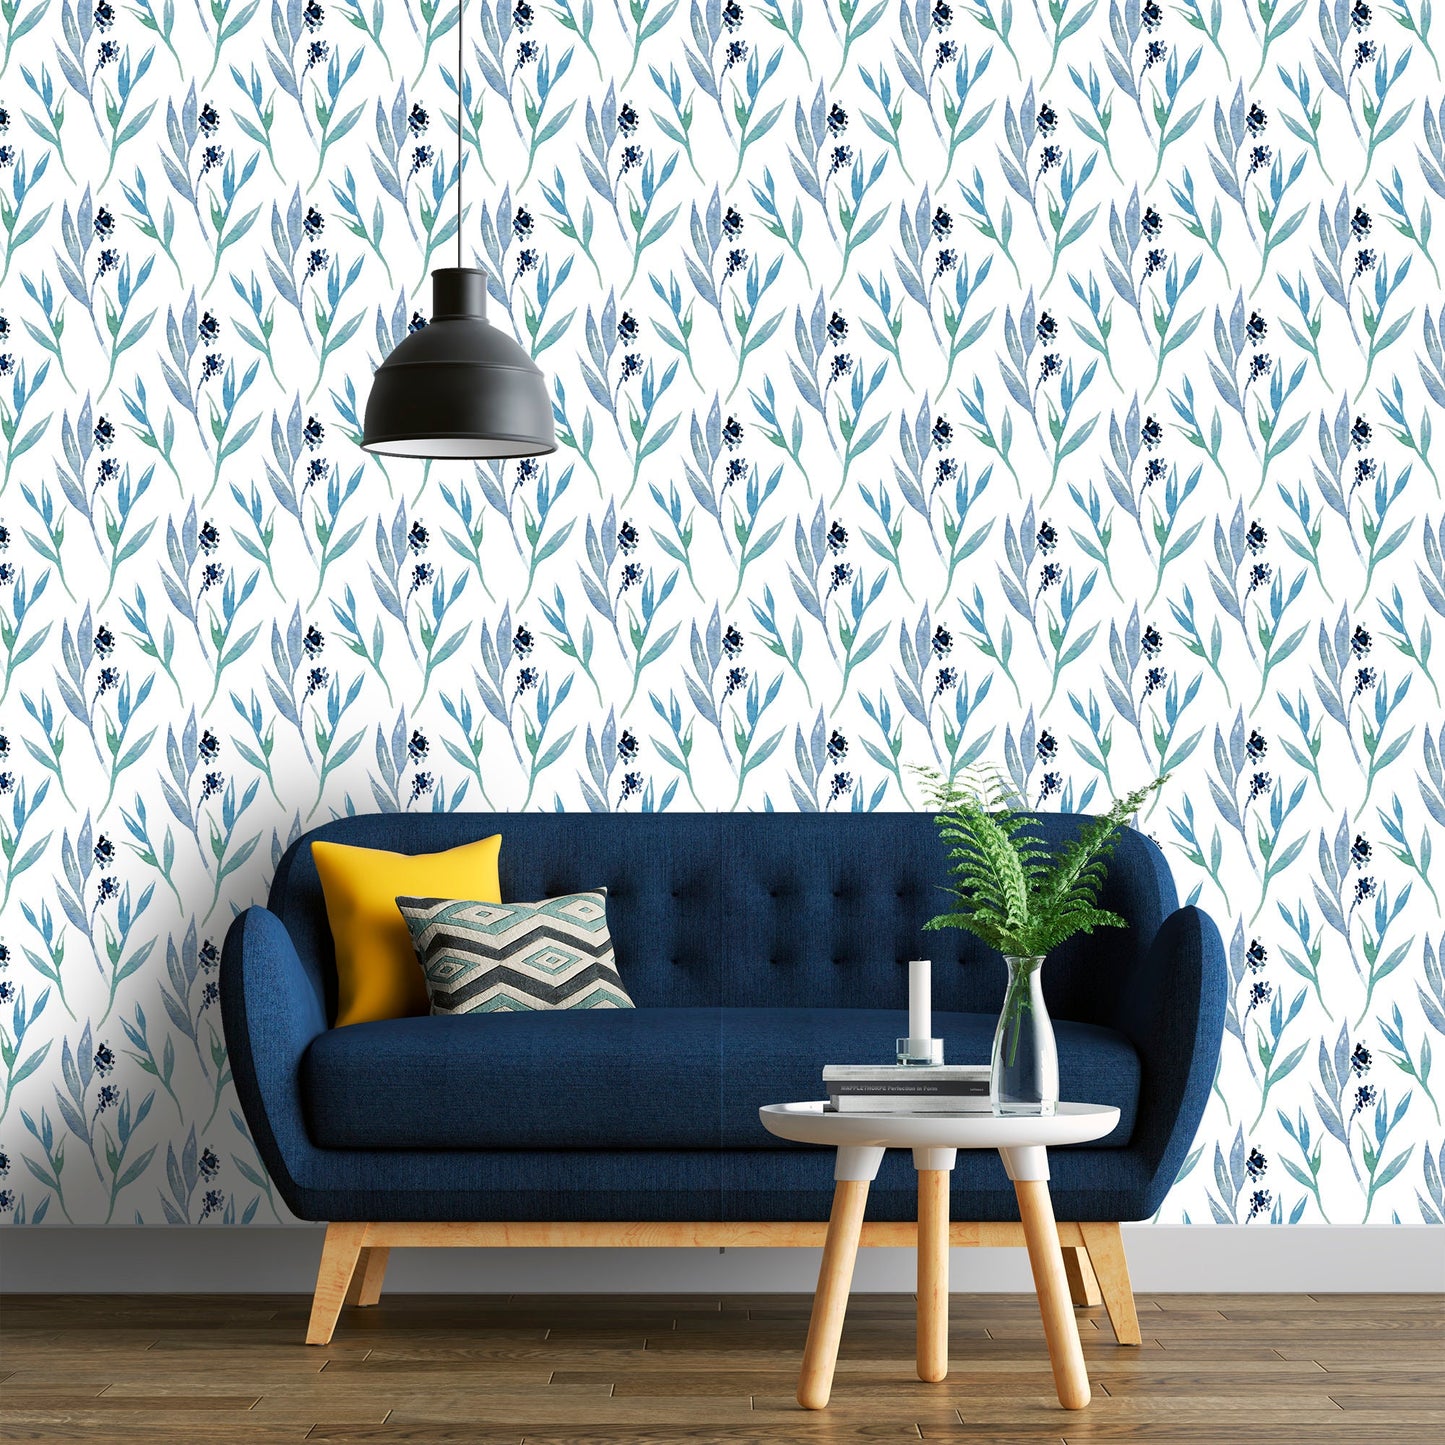 Wildflower Wallpaper Peel and Stick, Blue Floral Wallpaper, Removable Wall Paper